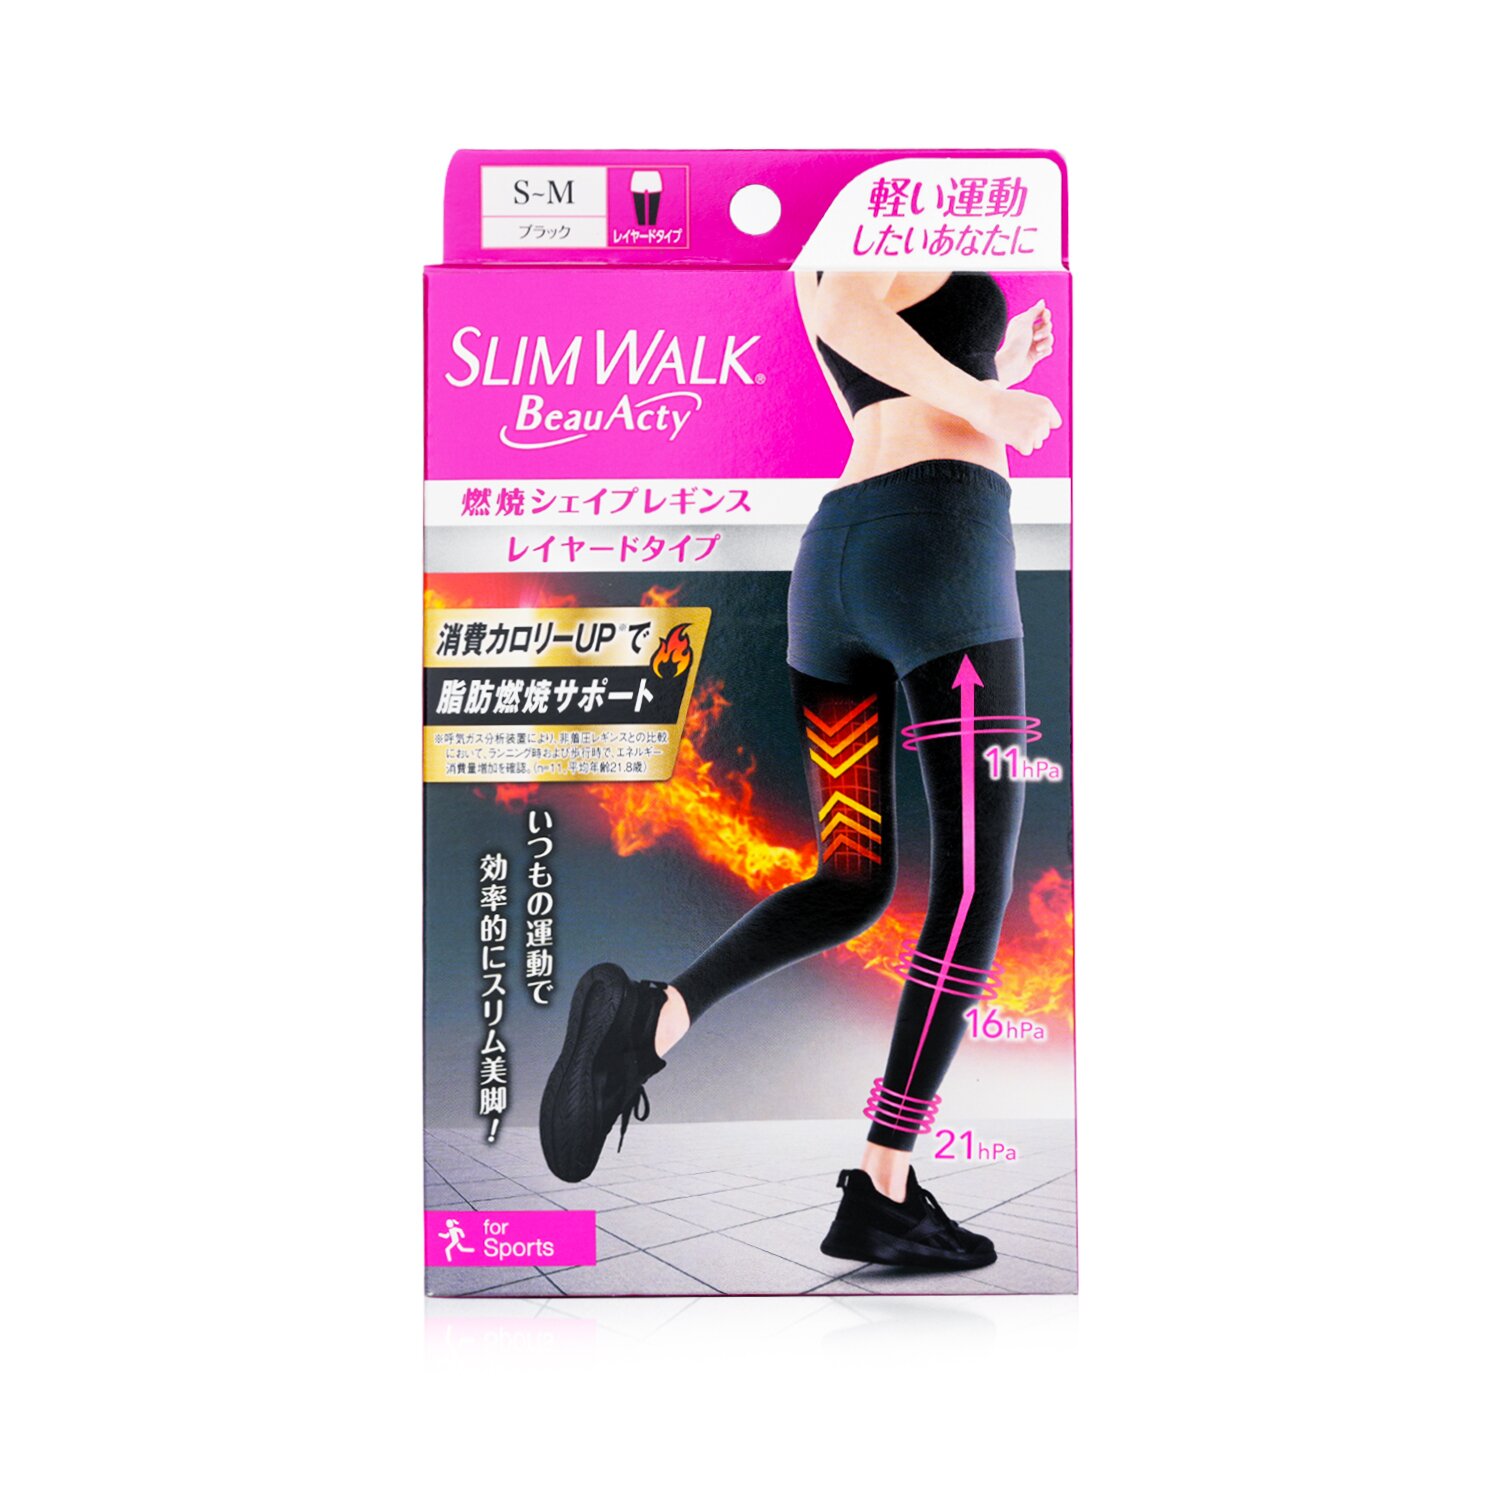 SlimWalk Compression Leggings with Taping Function for Sports 1pair